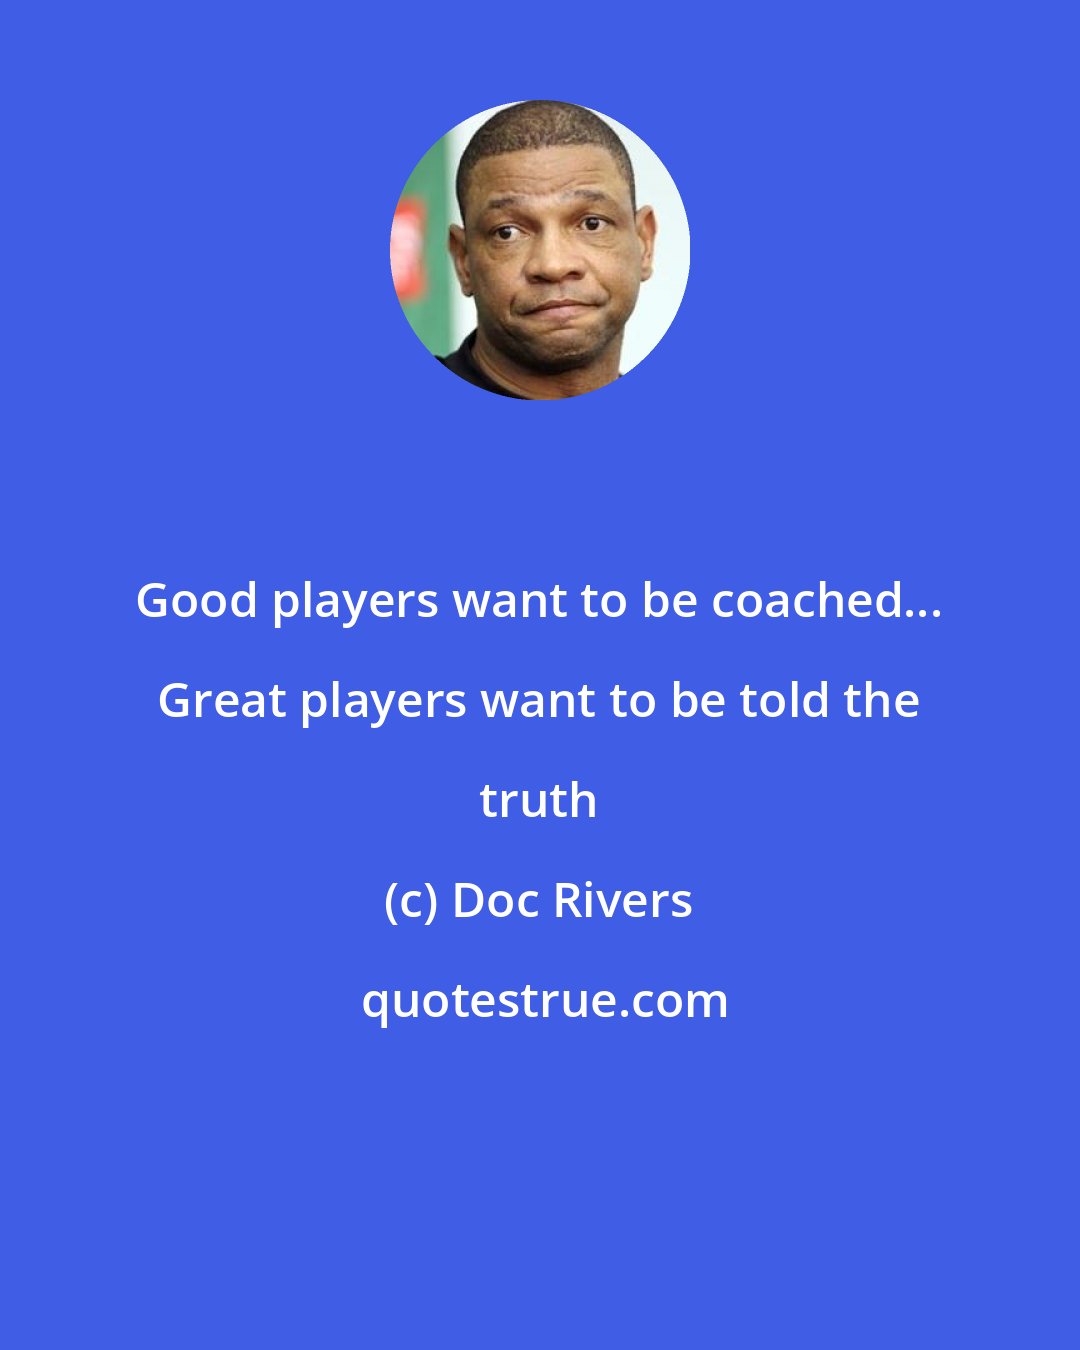 Doc Rivers: Good players want to be coached... Great players want to be told the truth